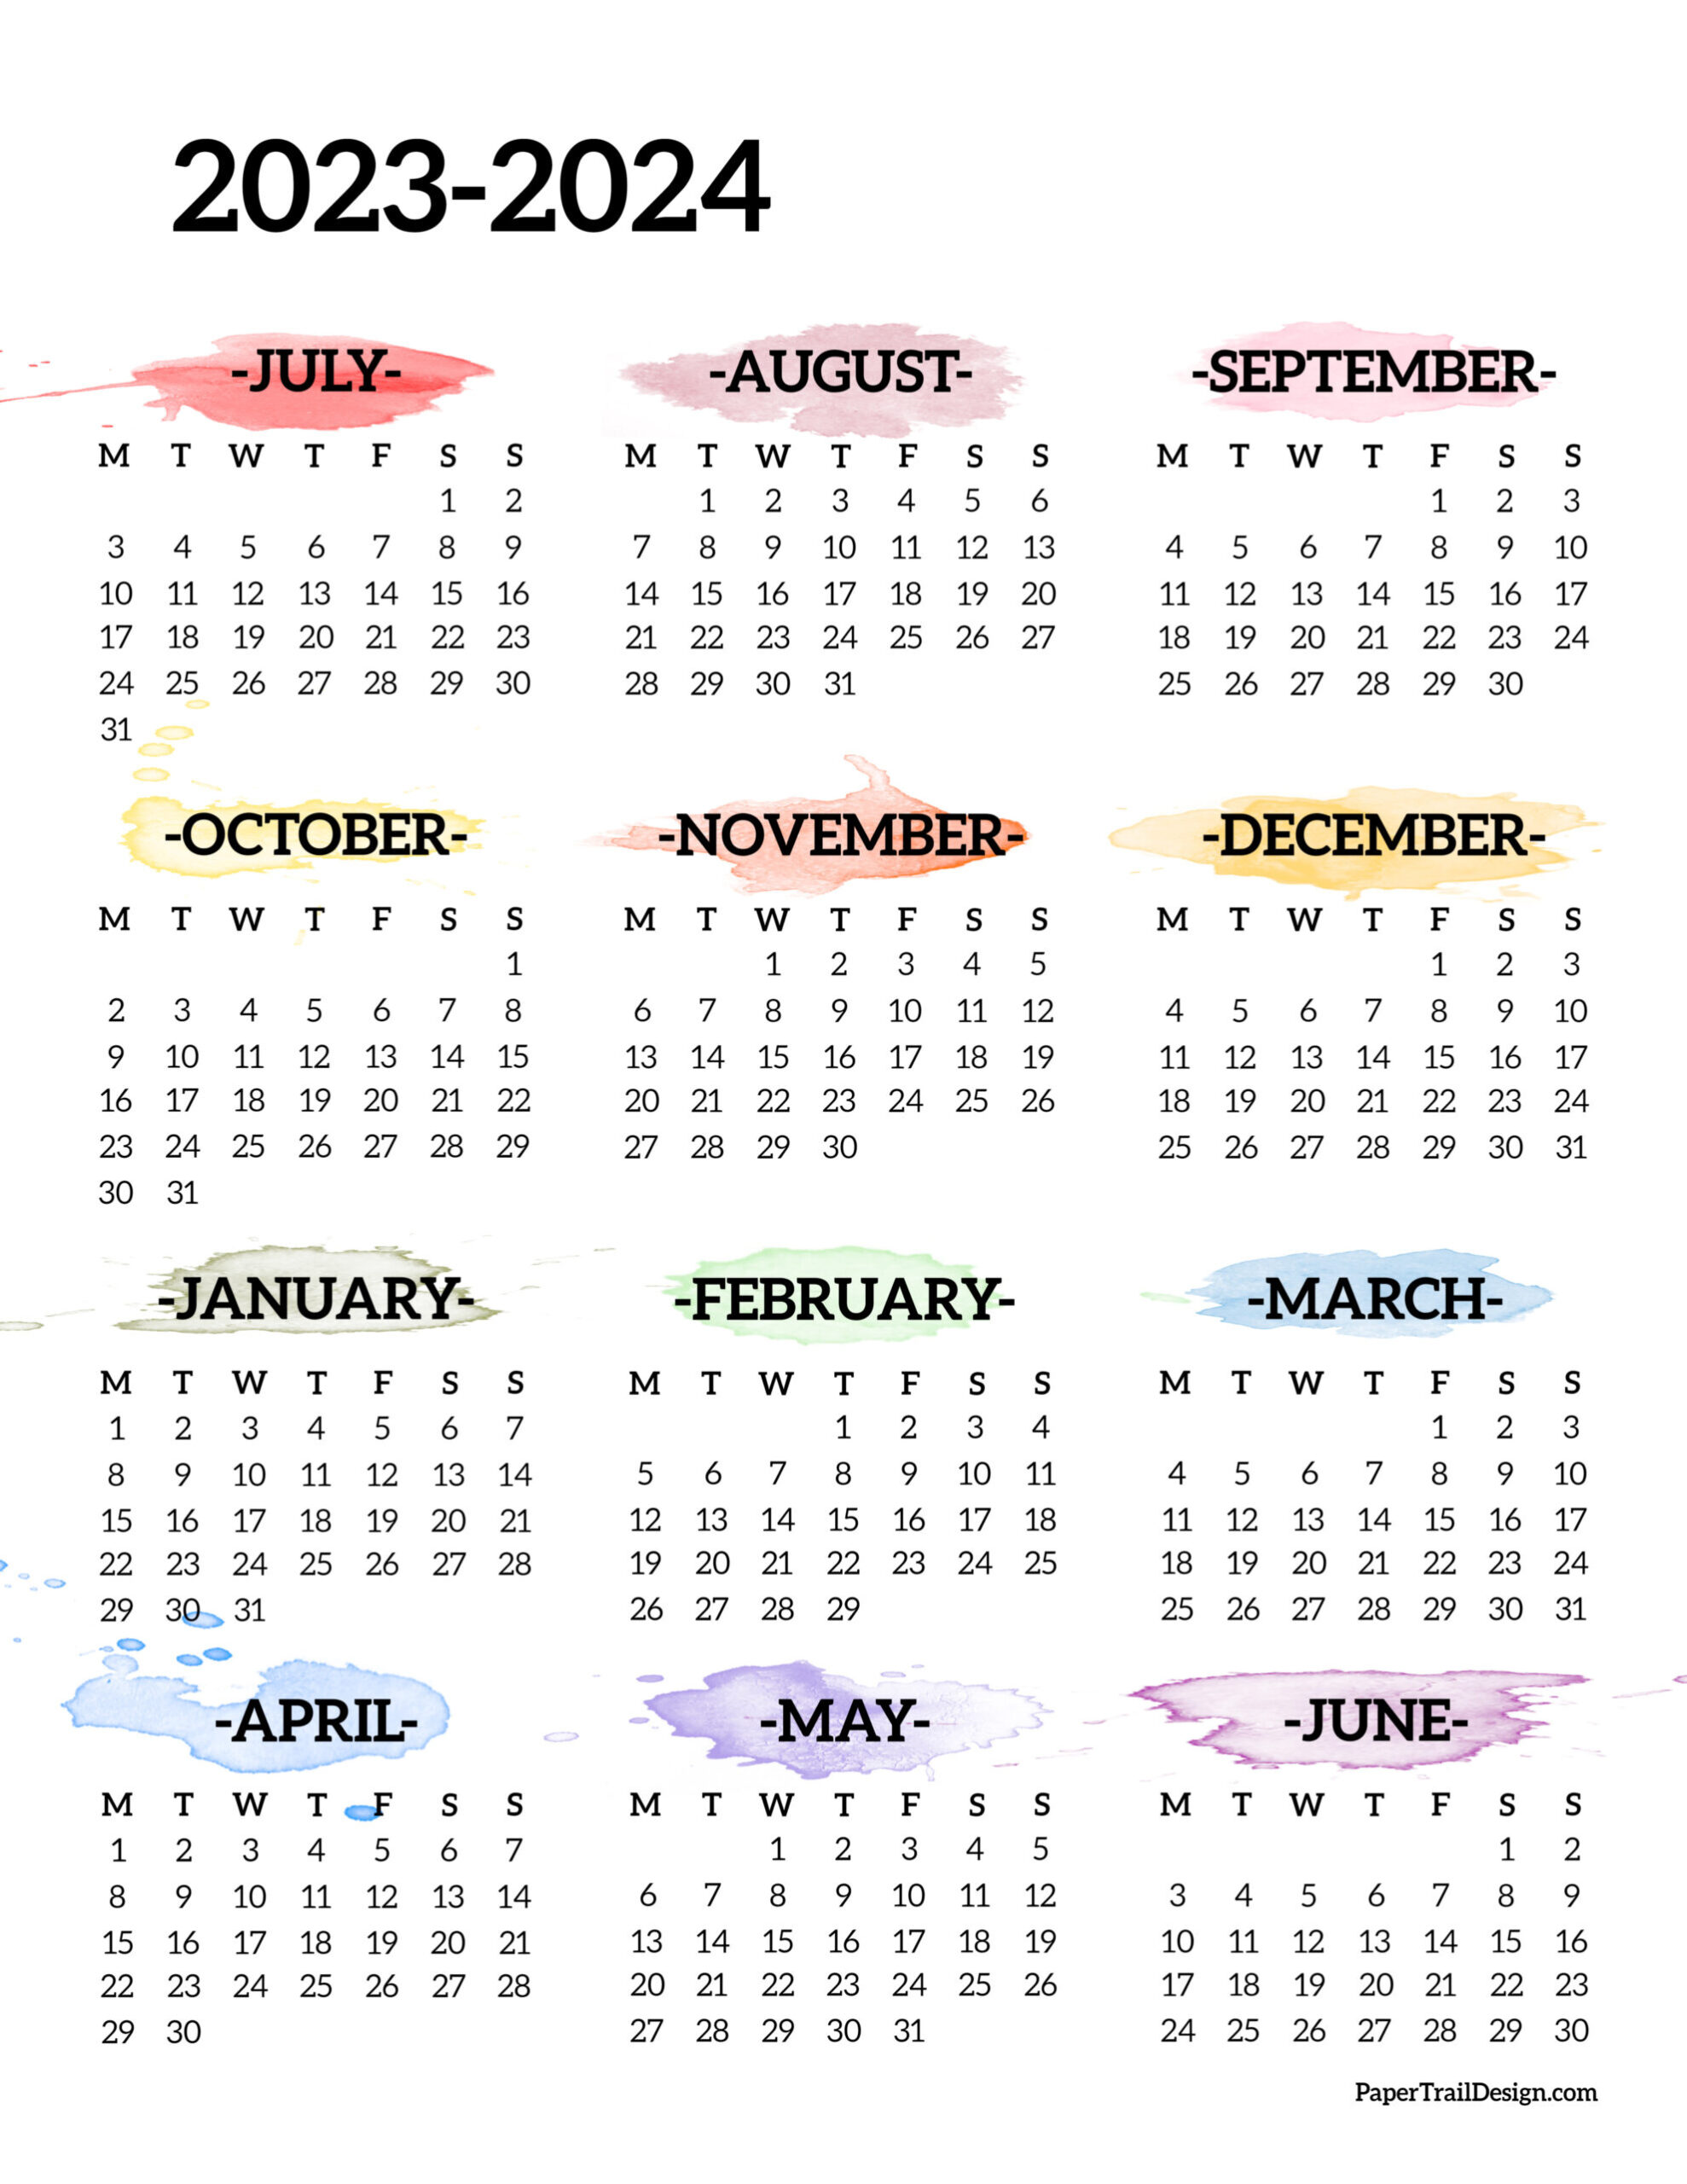 2023-2024 School Year Calendar Free Printable - Paper Trail Design pertaining to Calendar June 2023 To May 2024